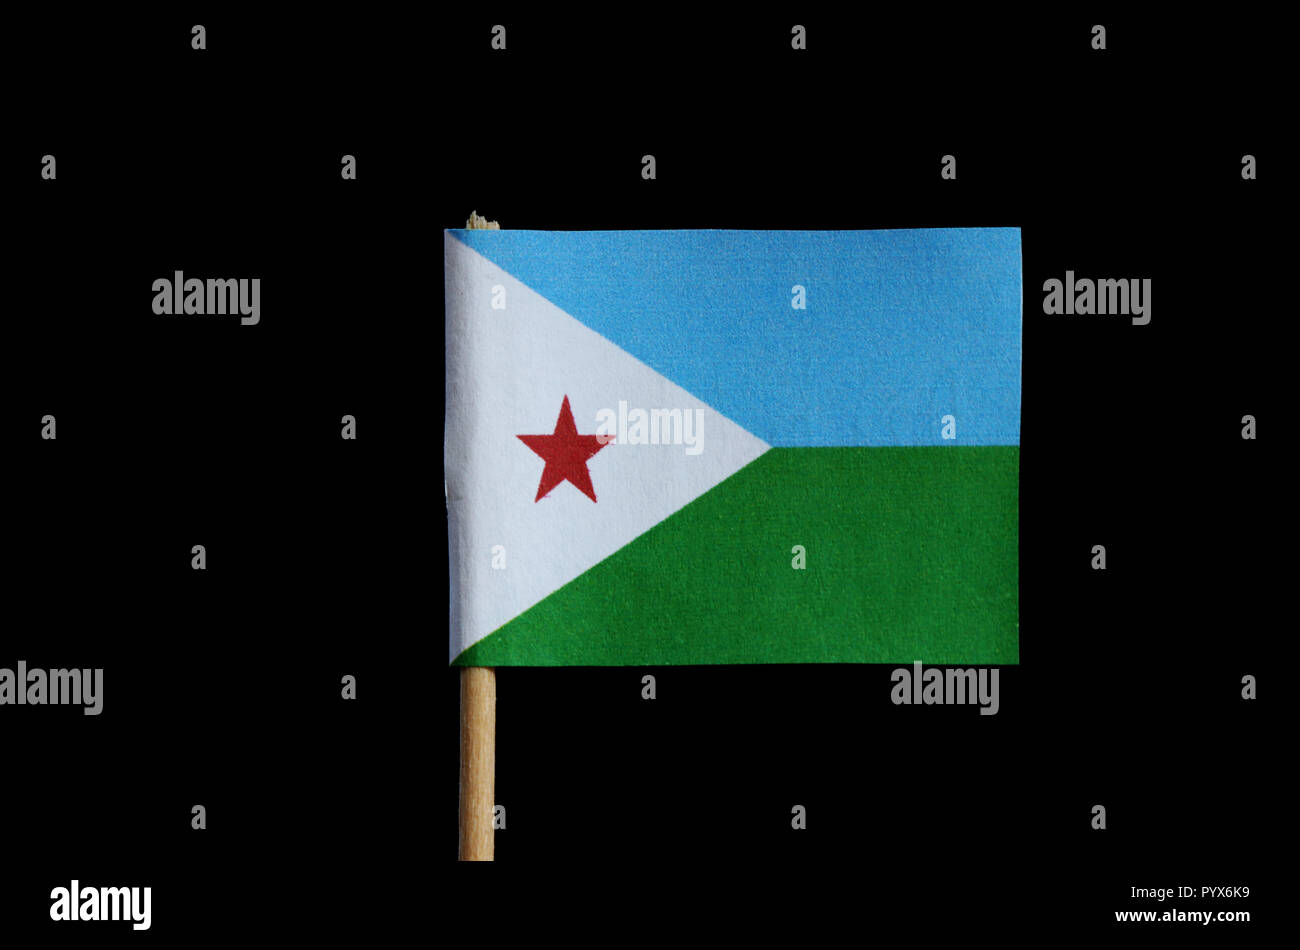 A official national flag of Djibouti on toothpick and black background.  Flag is consist three colours and one red star. Stock Photo